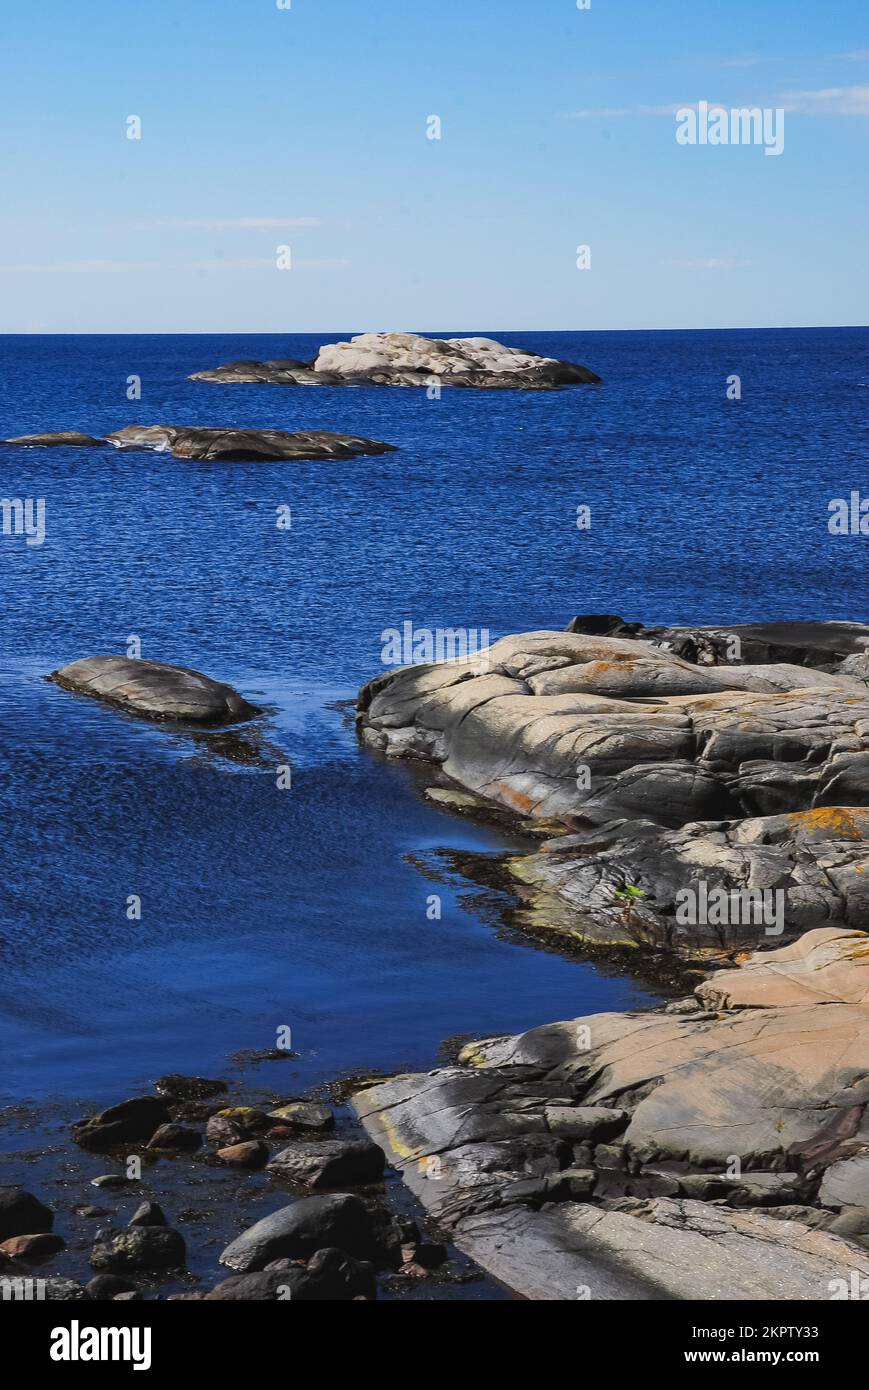 A beautiful view of the rocky coastline of a place called 'The End of the World'. Norwegian landscape.  Verdends Ende, Norway. Stock Photo